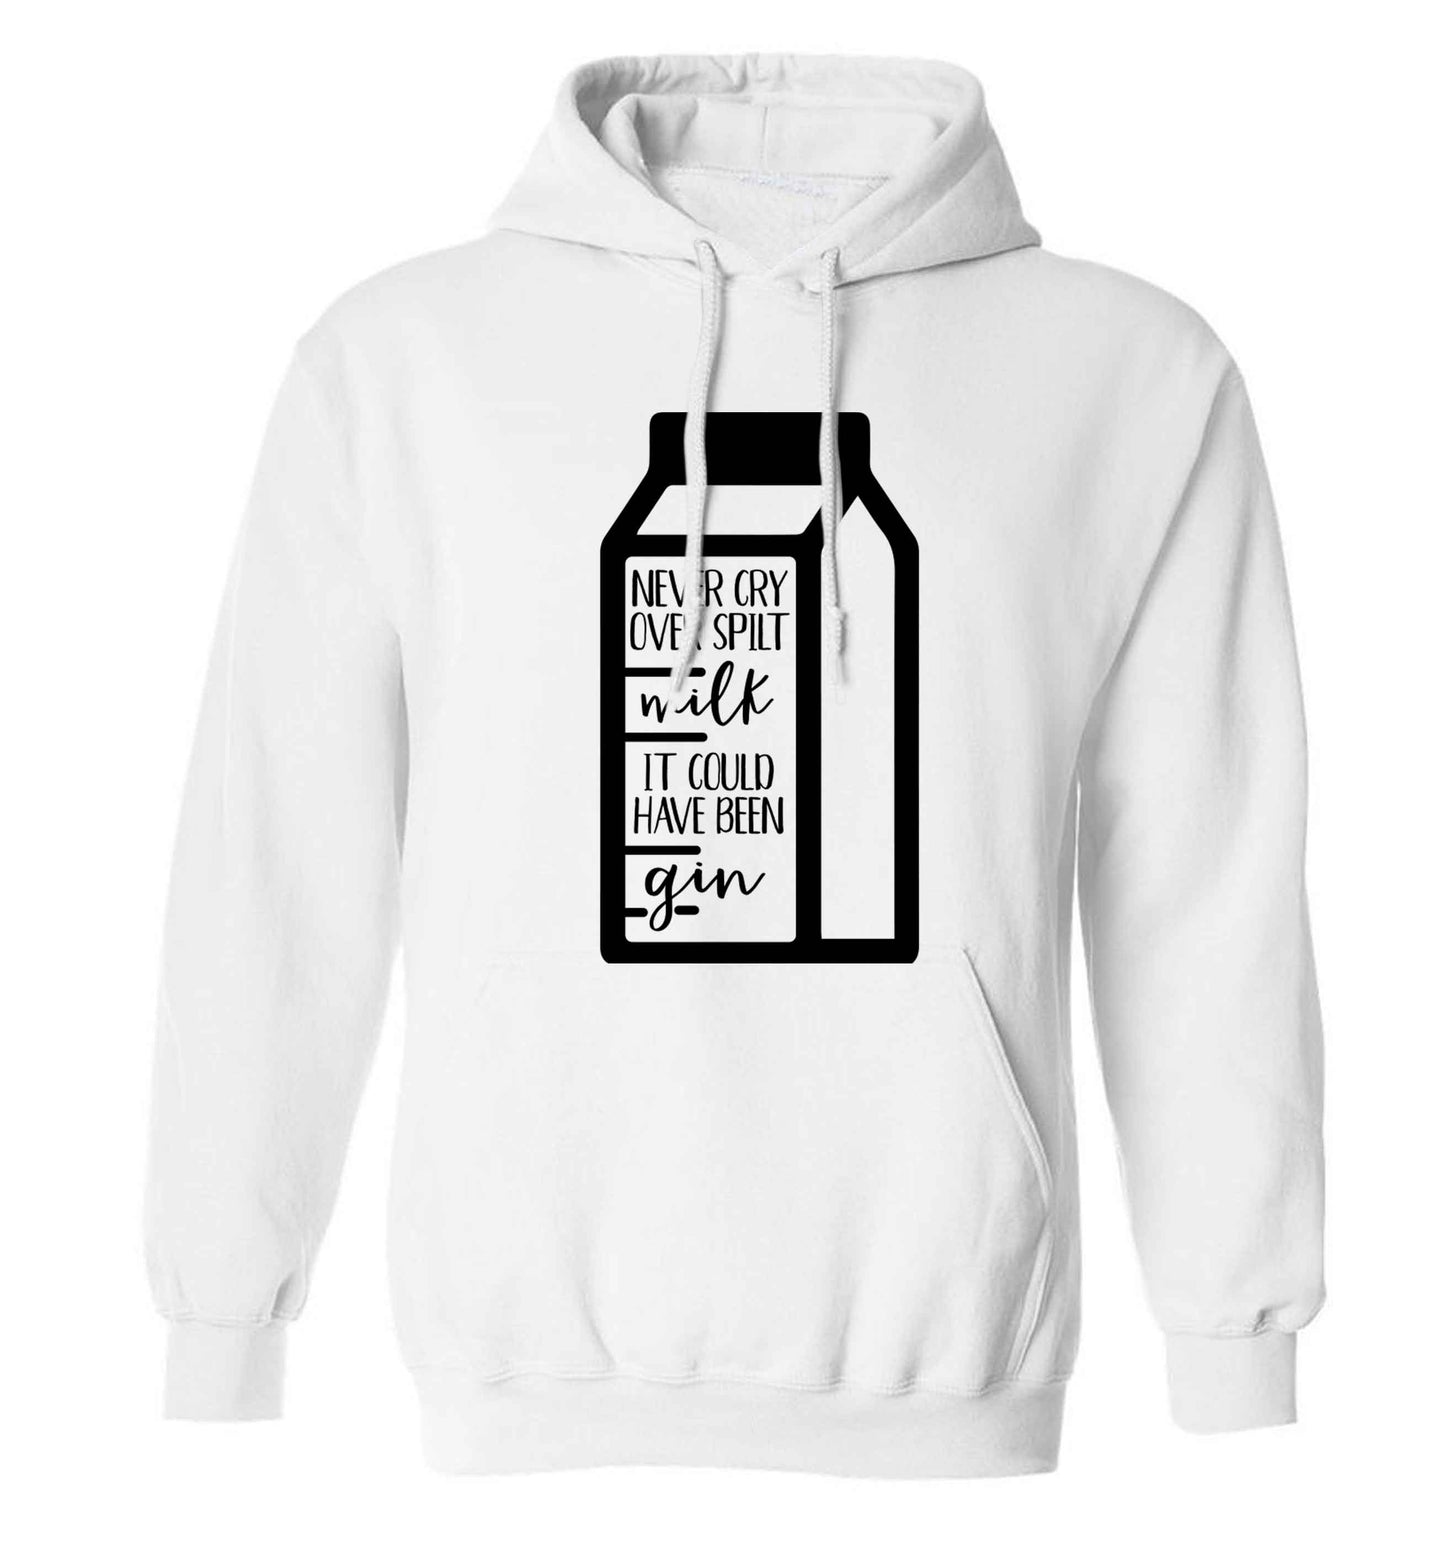 Never cry over spilt milk, it could have been gin adults unisex white hoodie 2XL